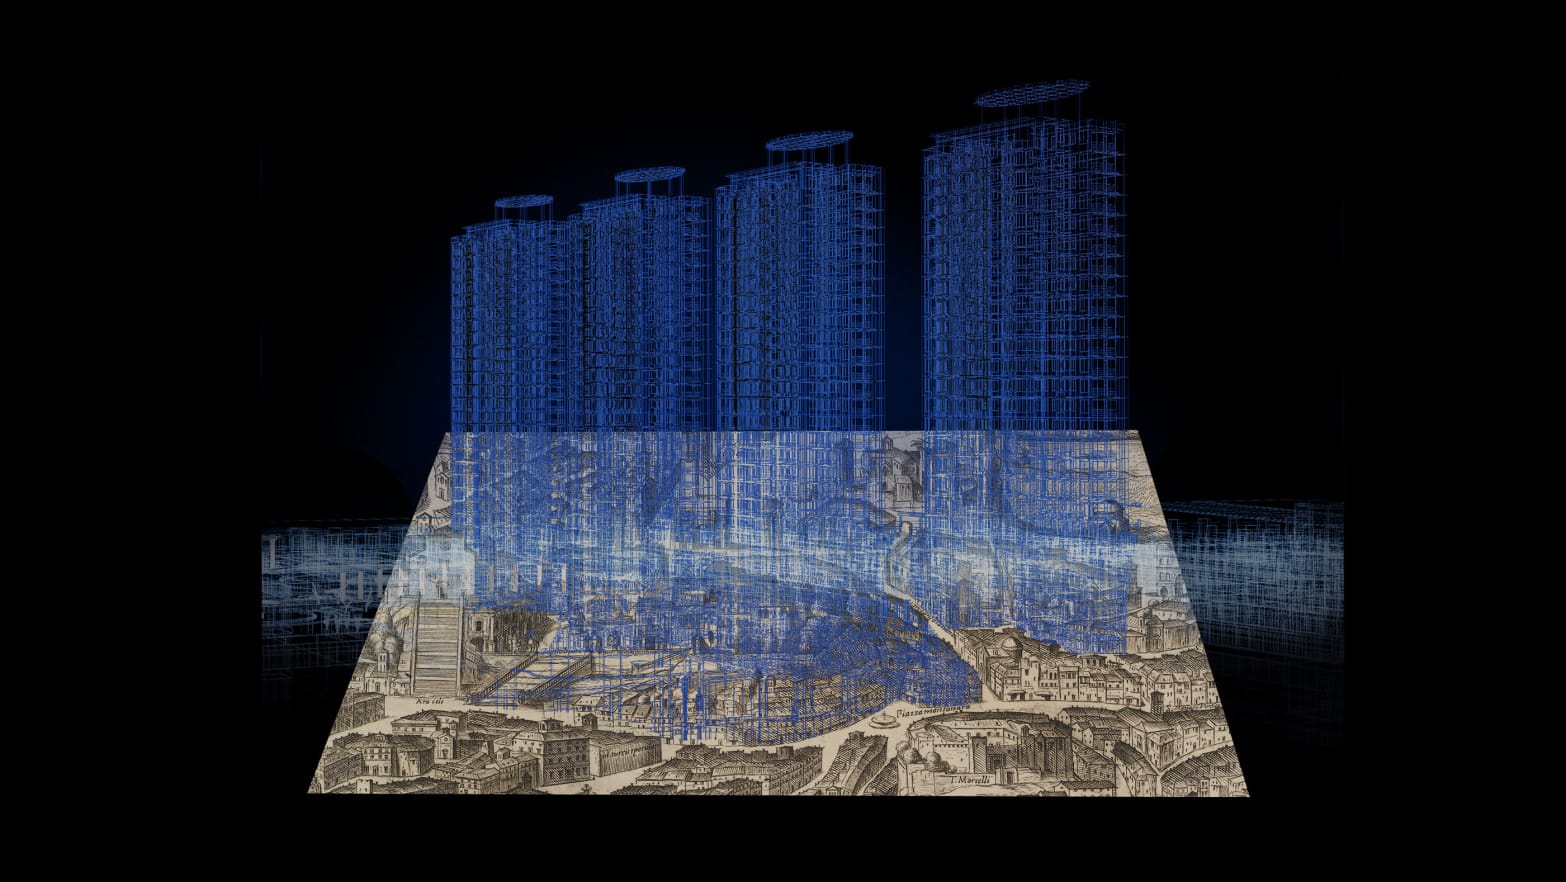 A photo illustration showing a speculative 3d futuristic city over an old colonial map.